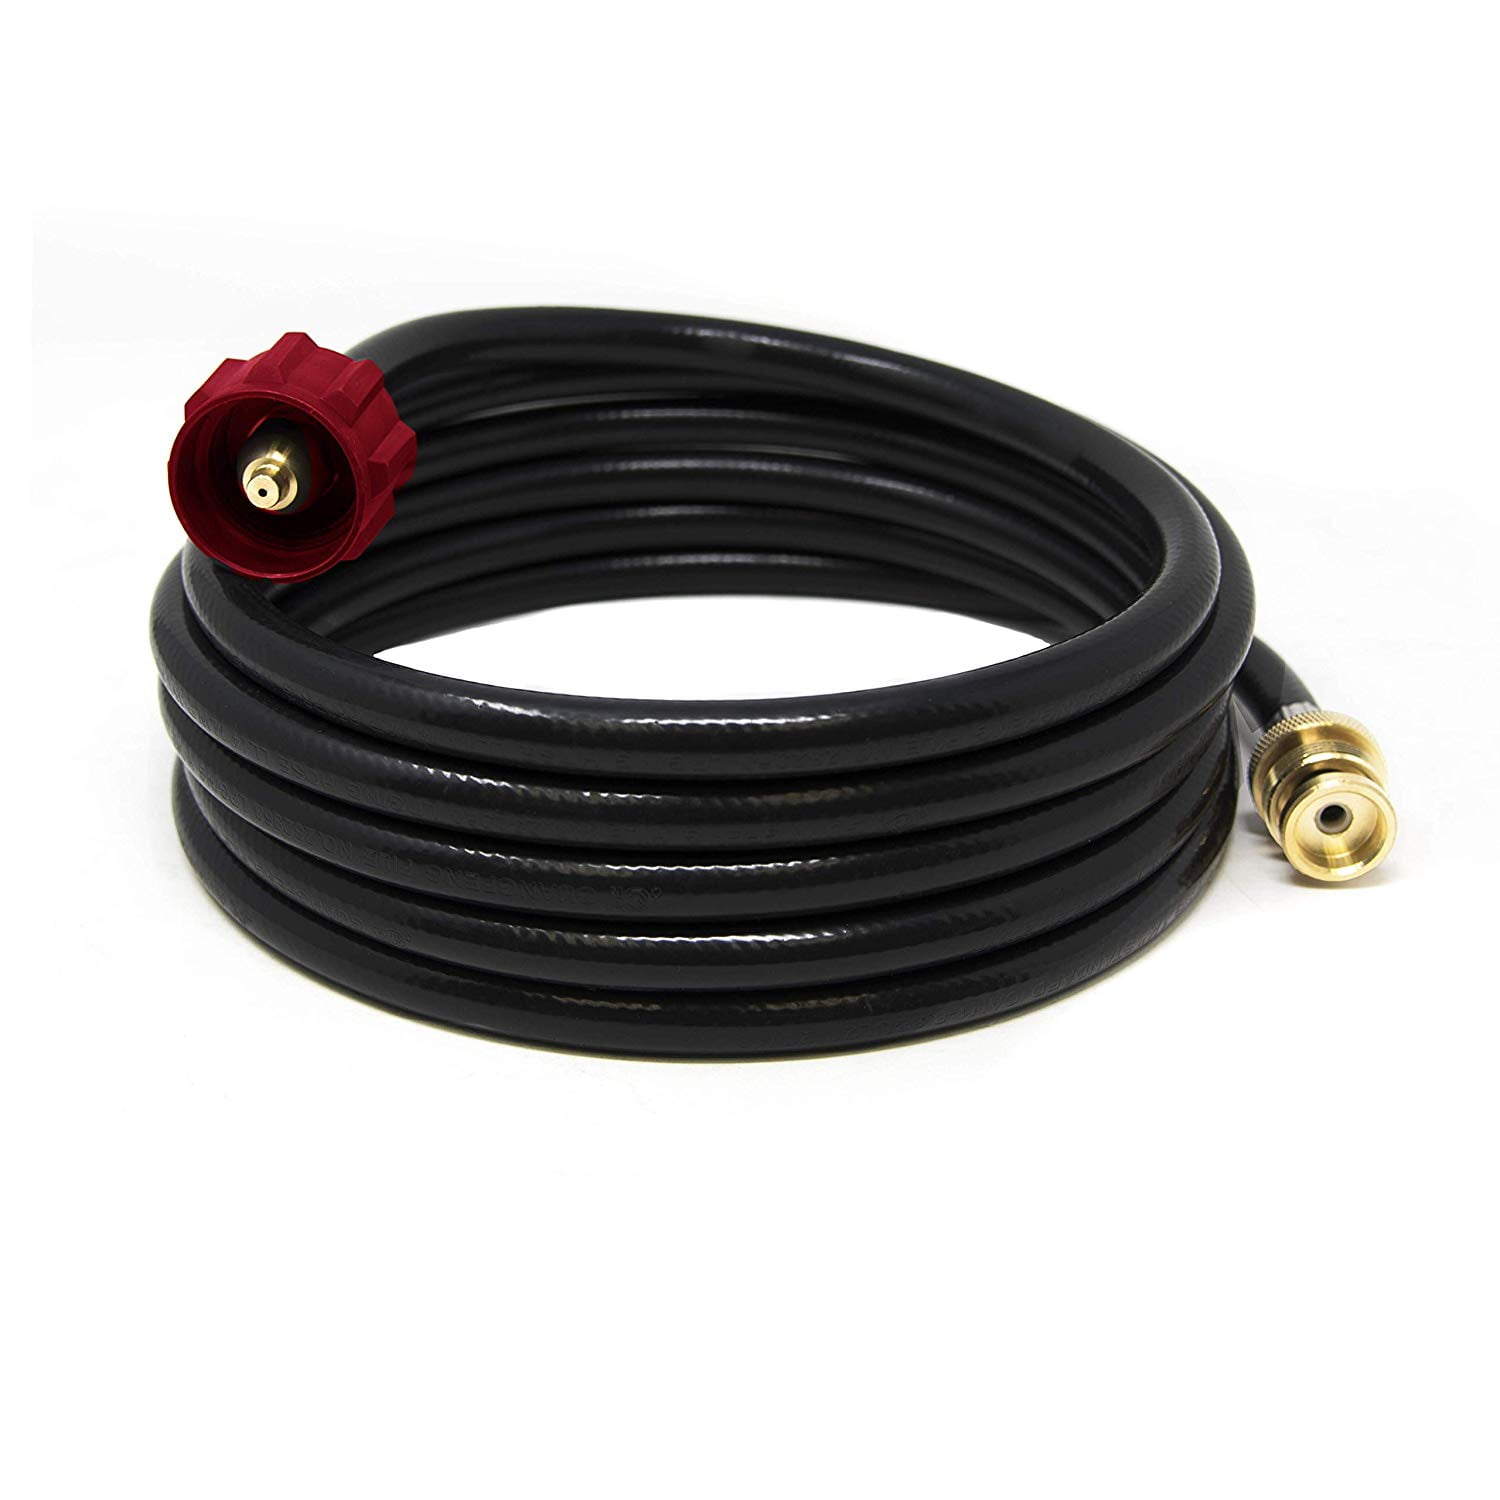 Propane Hose Adapter 1lb to 20lb DOZYANT 12FT Propane Hose Extension Propane Converter Hose for Propane Heater Tabletop Grill and More 1LB Portable Appliance 